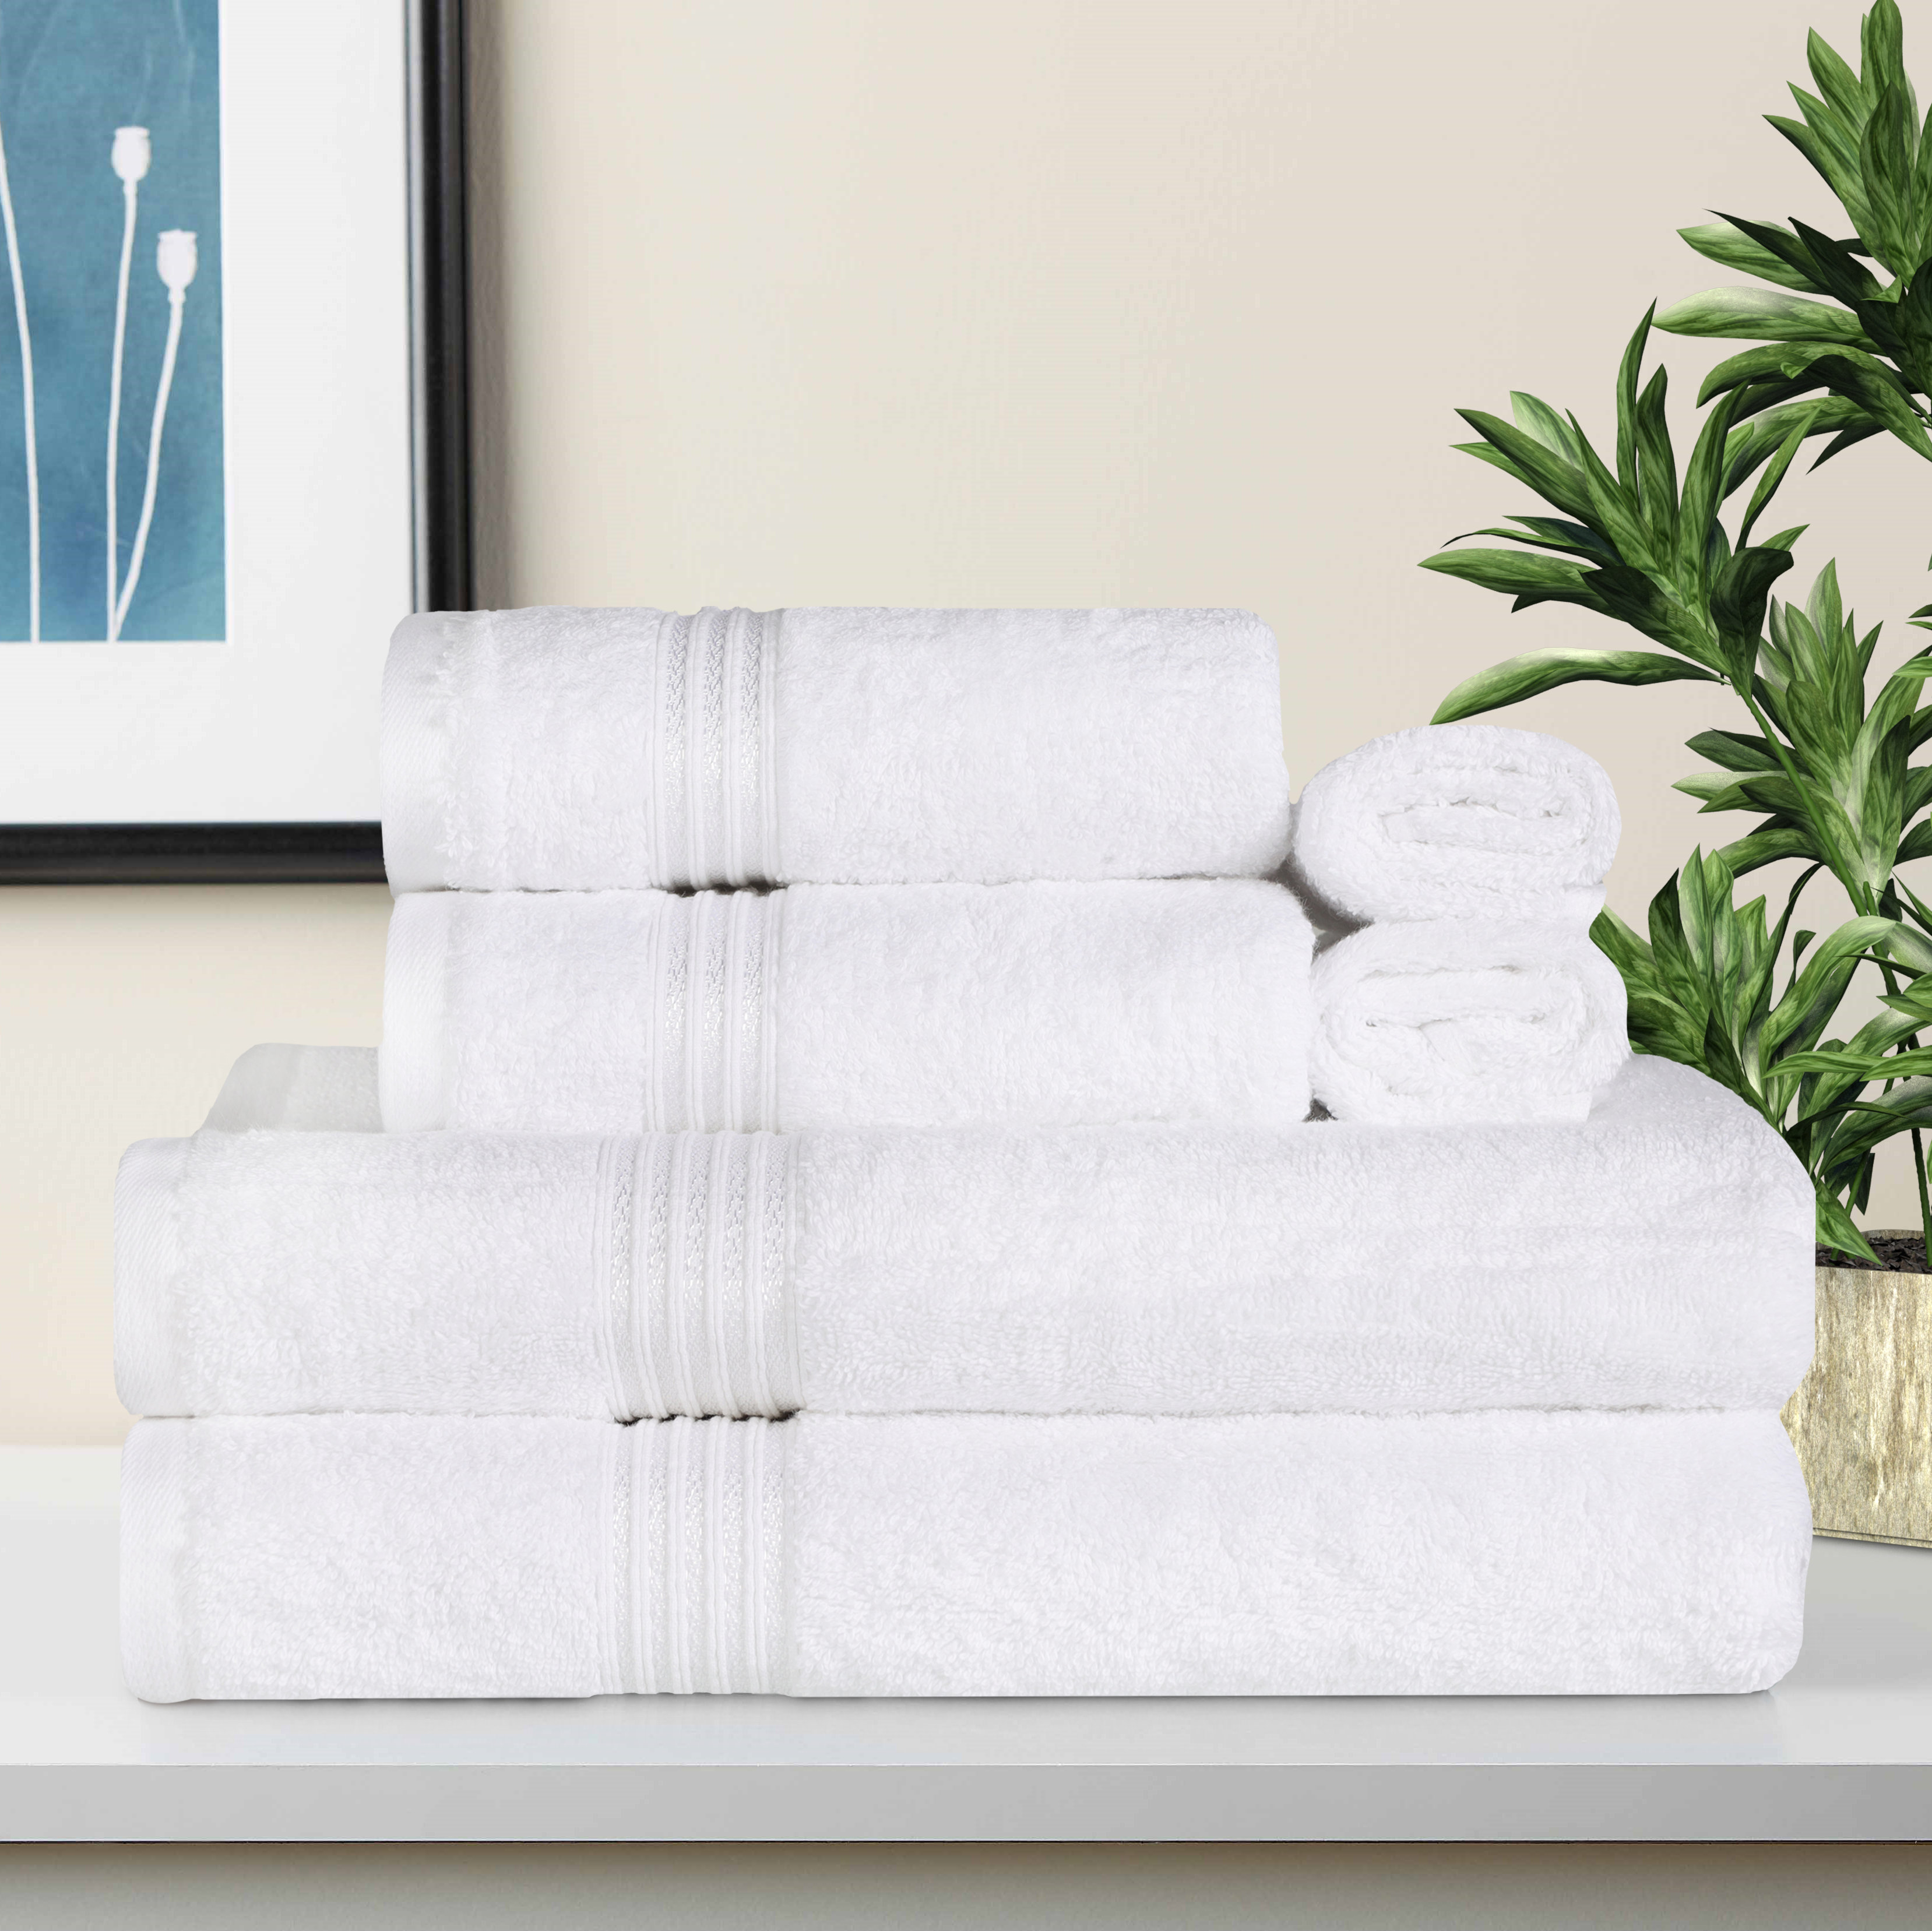 2 x Bath Sheets, 2 x Bath Towels And 4 x Hand Towels Wine 8 Pieces Towels Set Egyptian Cotton 700gsm Extra Soft Top Quality Luxury Miami 